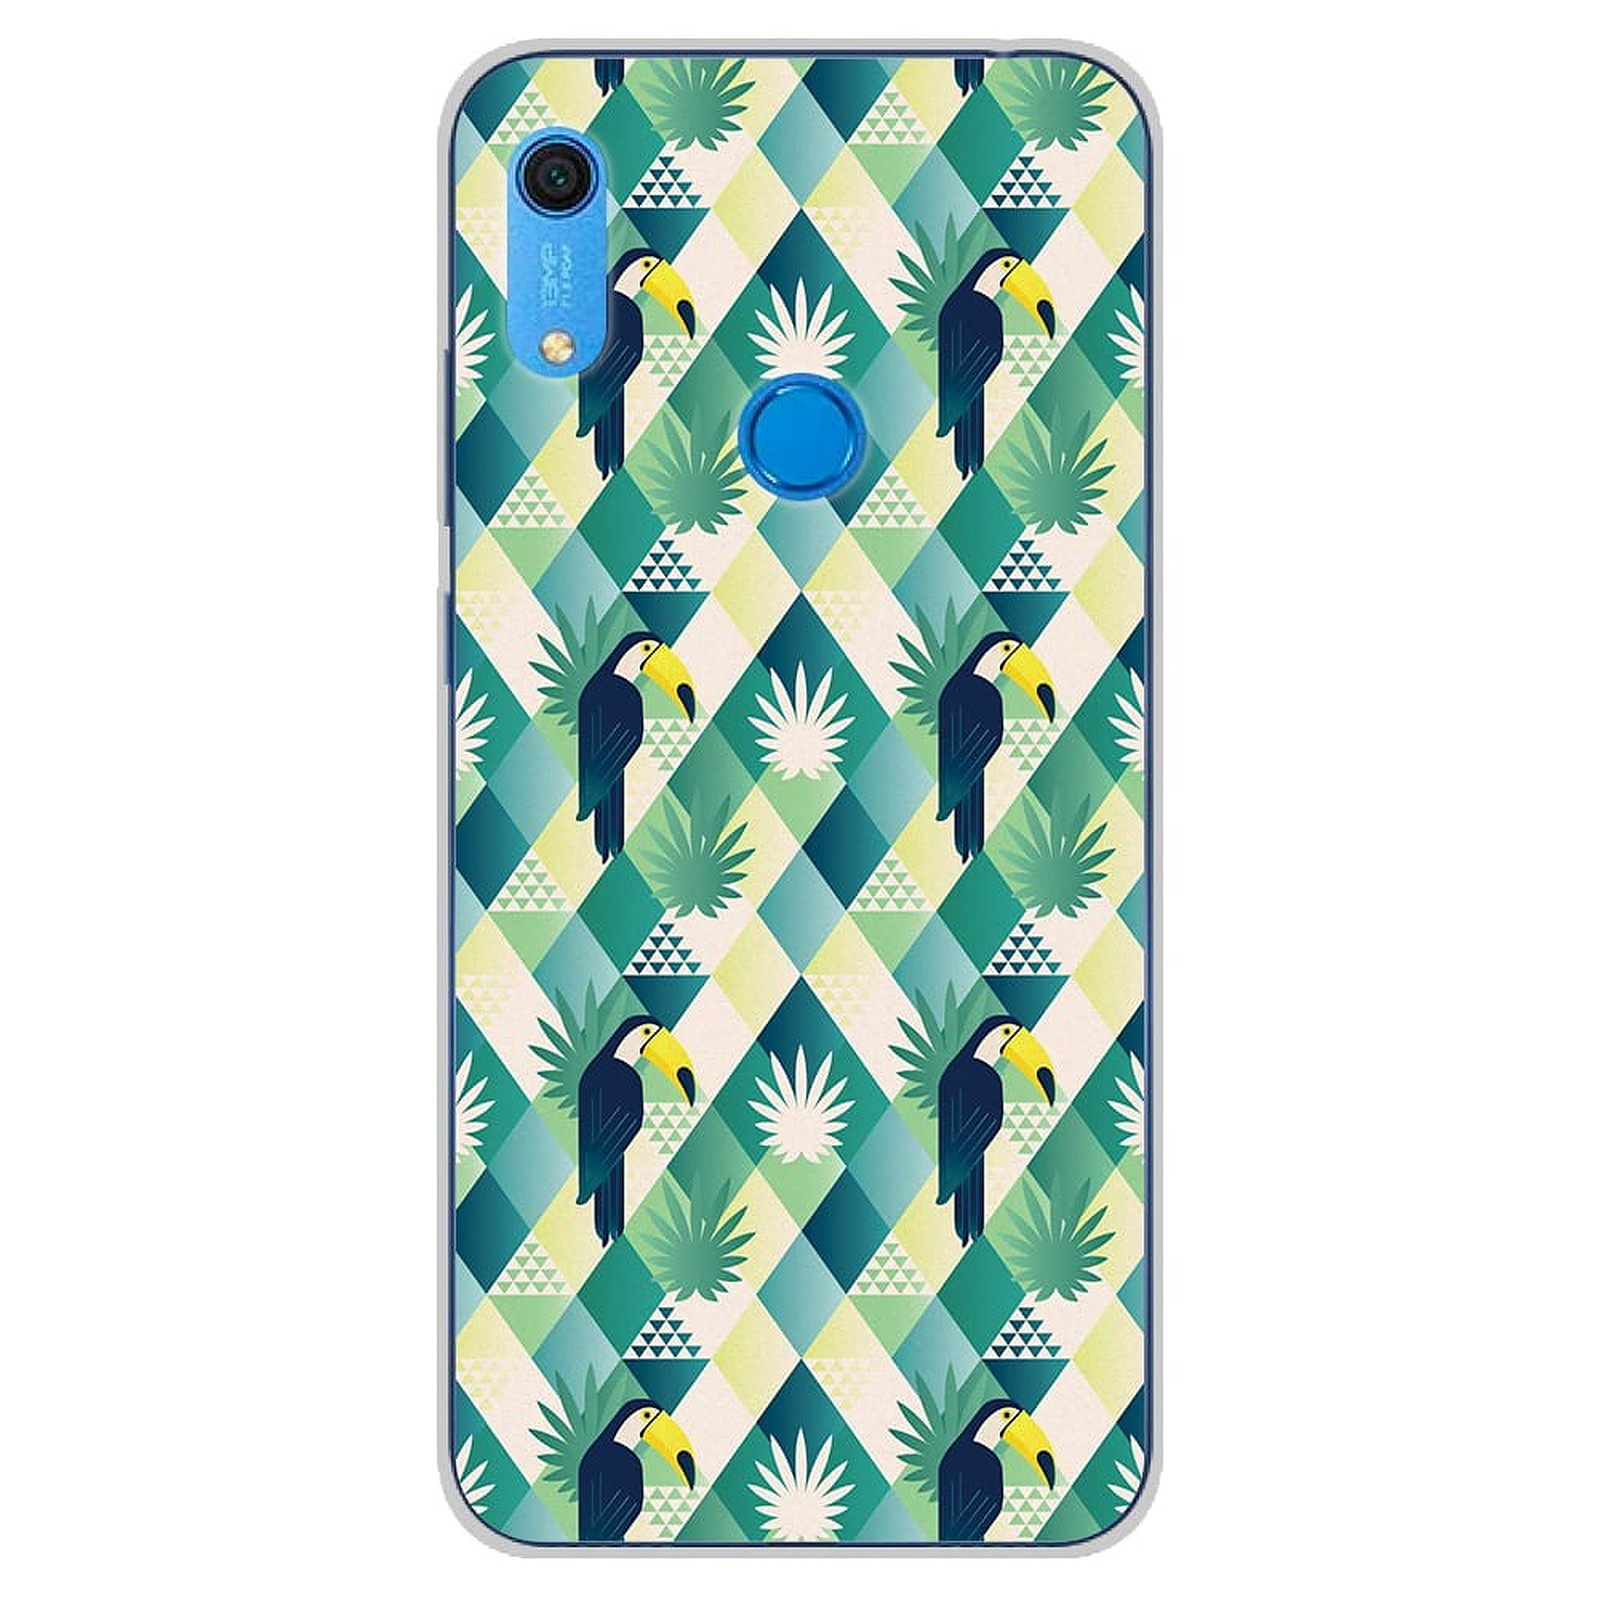 1001 Coques Coque silicone gel Huawei Y6S motif Toucan losange - Coque telephone 1001Coques